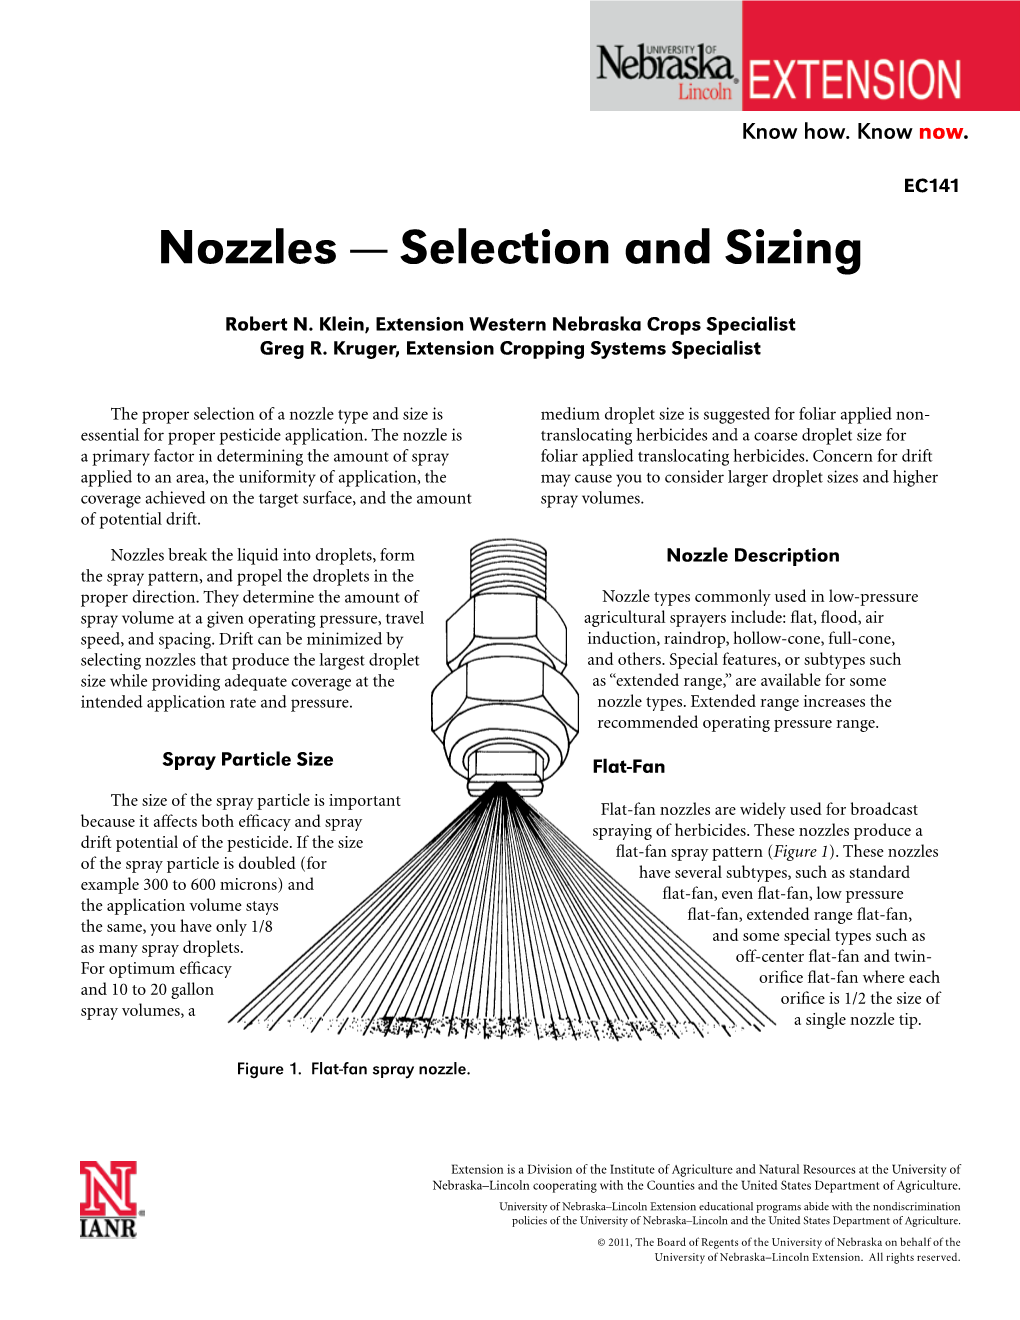 Nozzles — Selection and Sizing